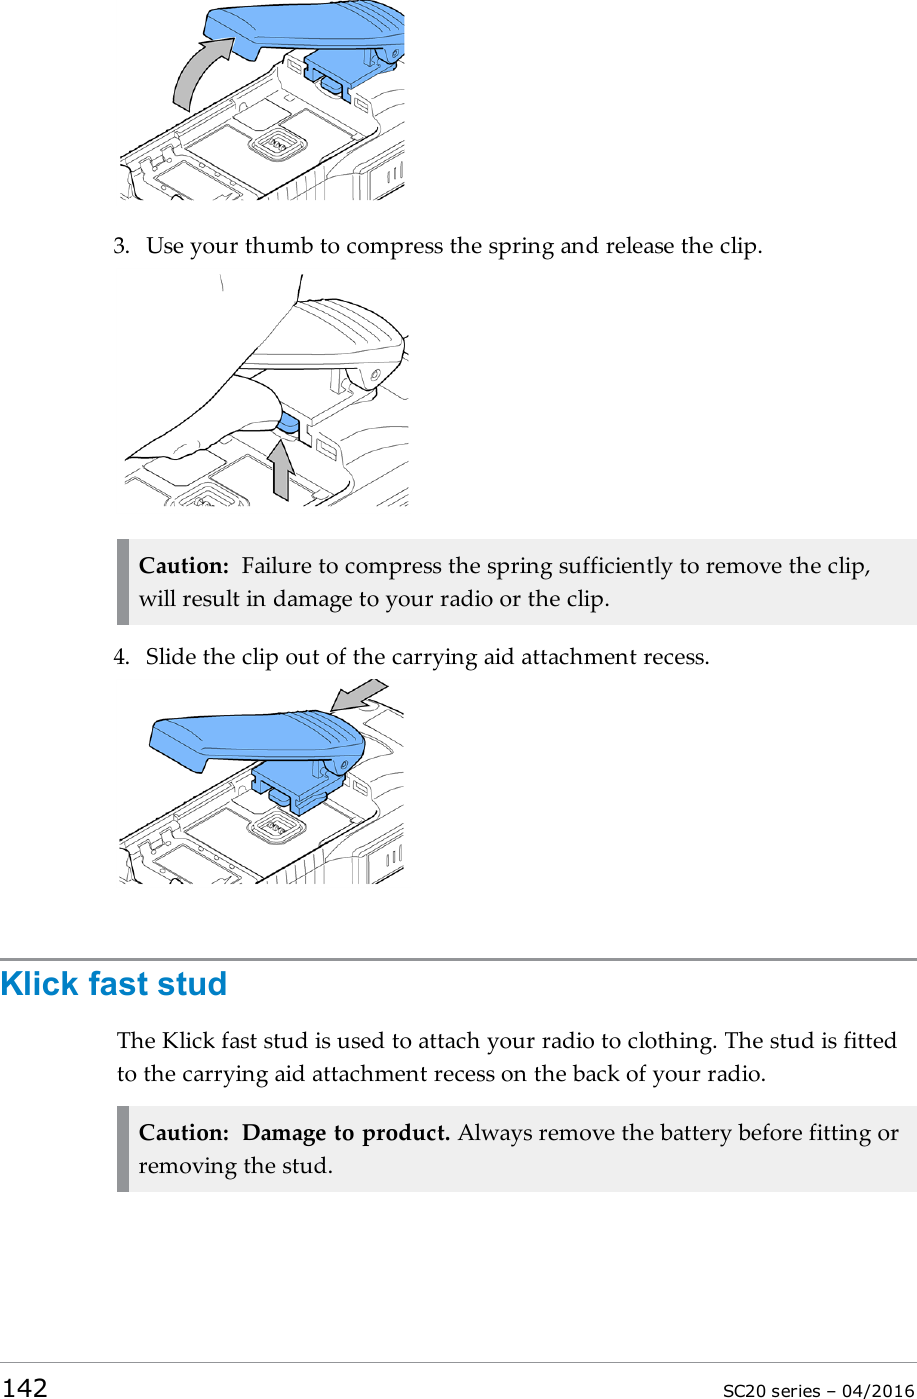 3. Use your thumb to compress the spring and release the clip.Caution: Failure to compress the spring sufficiently to remove the clip,will result in damage to your radio or the clip.4. Slide the clip out of the carrying aid attachment recess.Klick fast studThe Klick fast stud is used to attach your radio to clothing. The stud is fittedto the carrying aid attachment recess on the back of your radio.Caution: Damage to product. Always remove the battery before fitting orremoving the stud.142 SC20 series – 04/2016